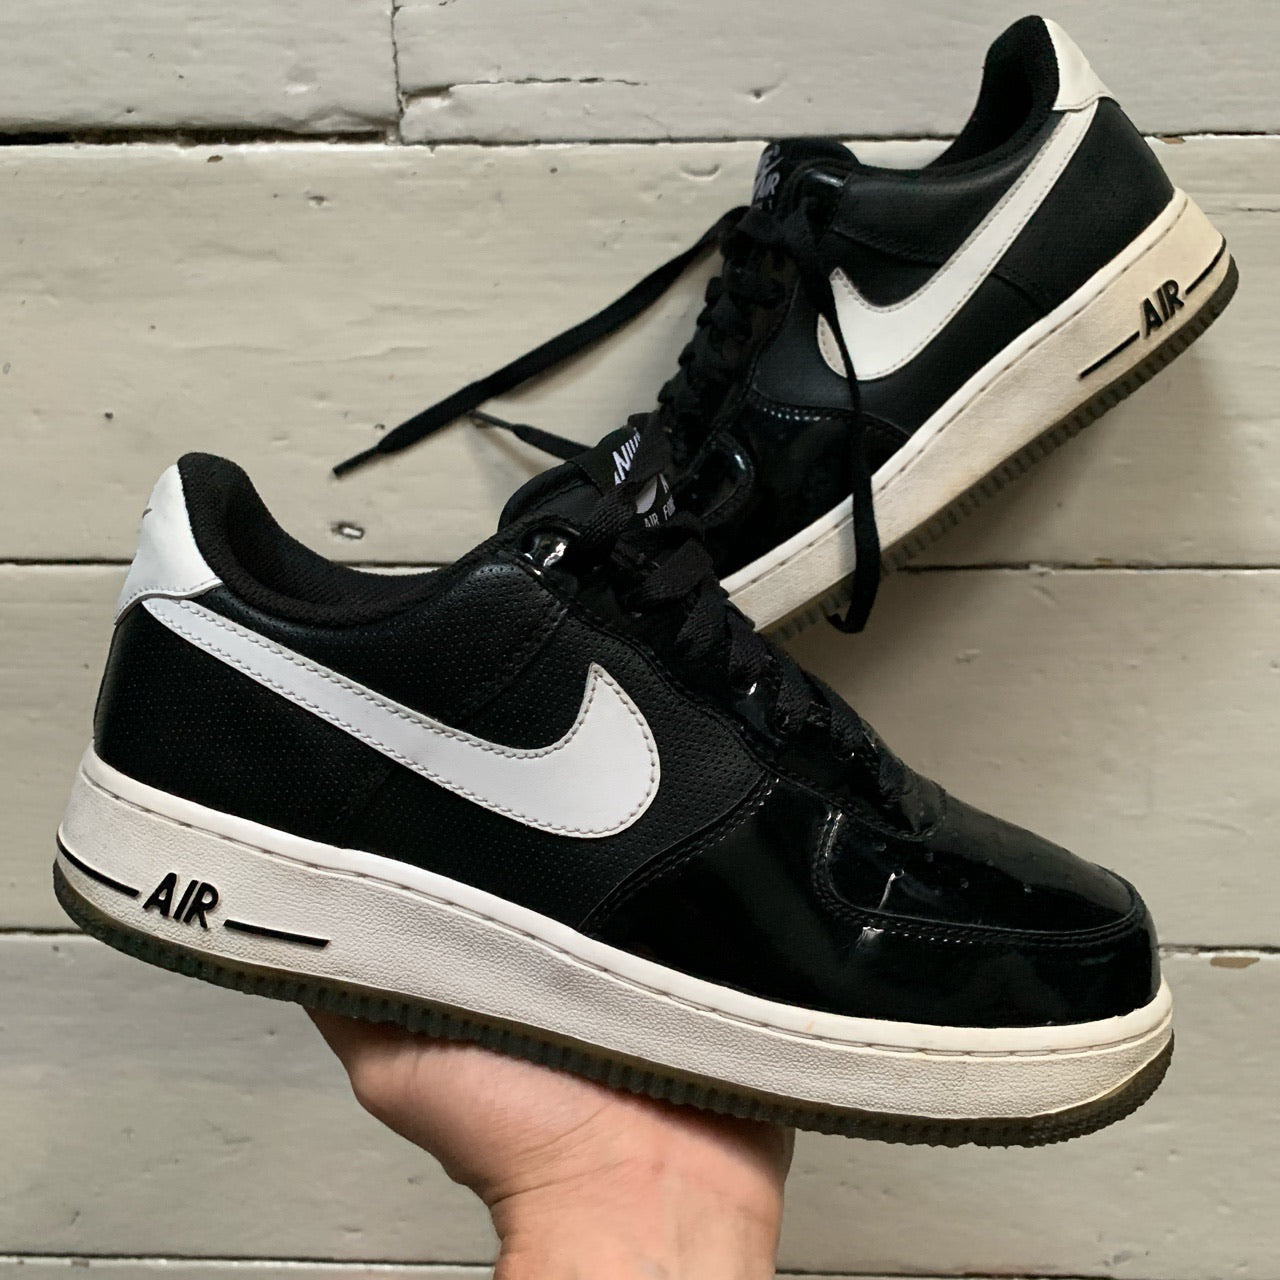 Nike Air Force 1 Black Patent and White (UK 6)